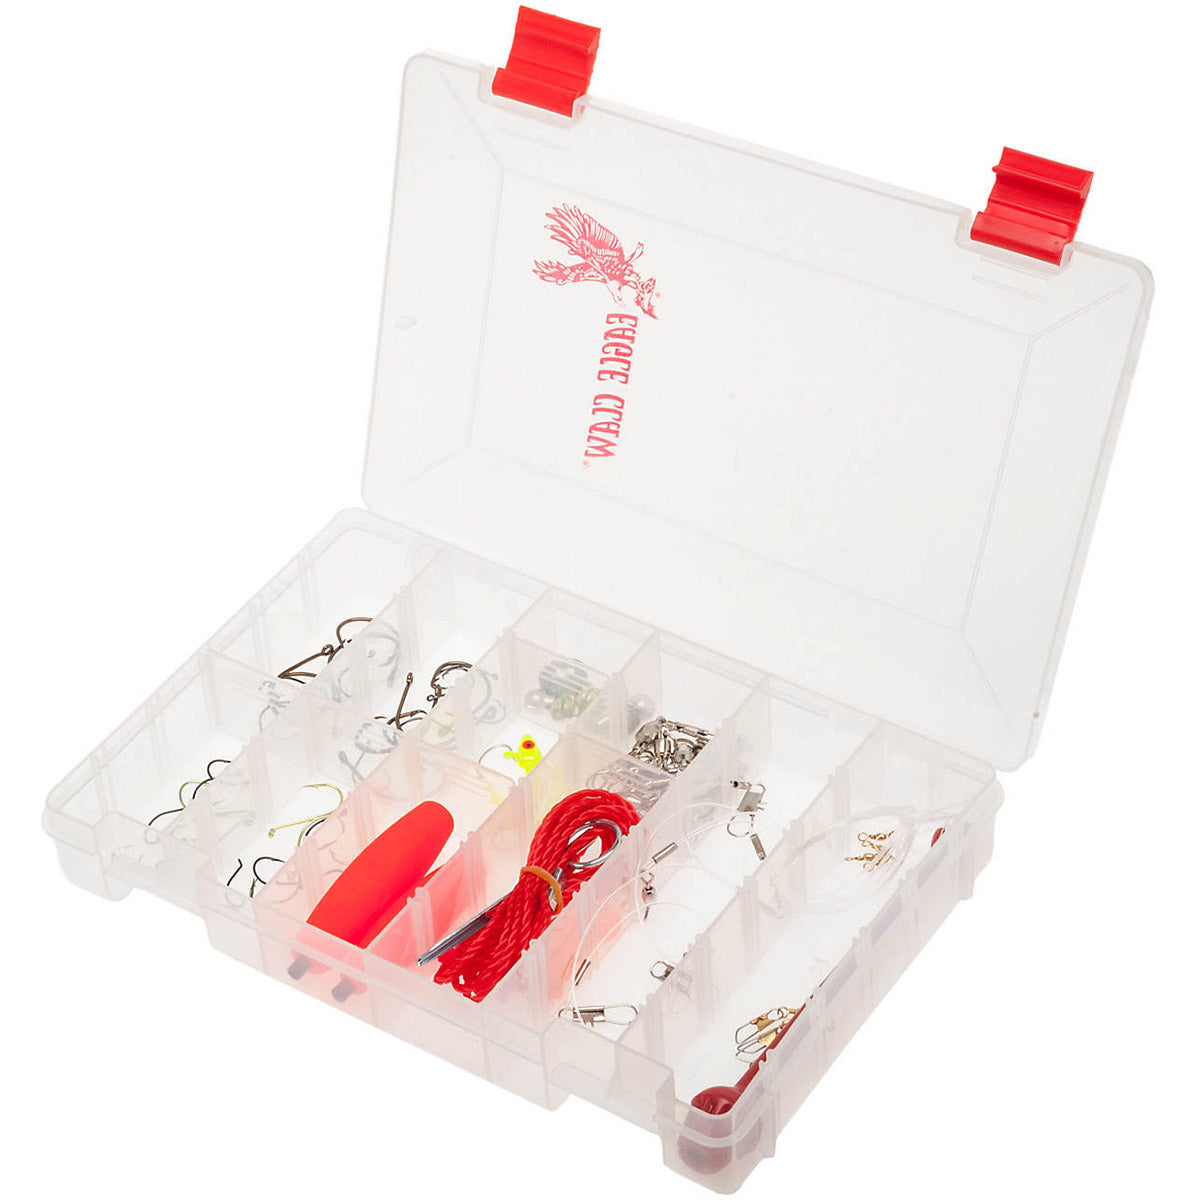 Eagle Claw Saltwater Tackle Kit, 75 Piece Eagle Claw